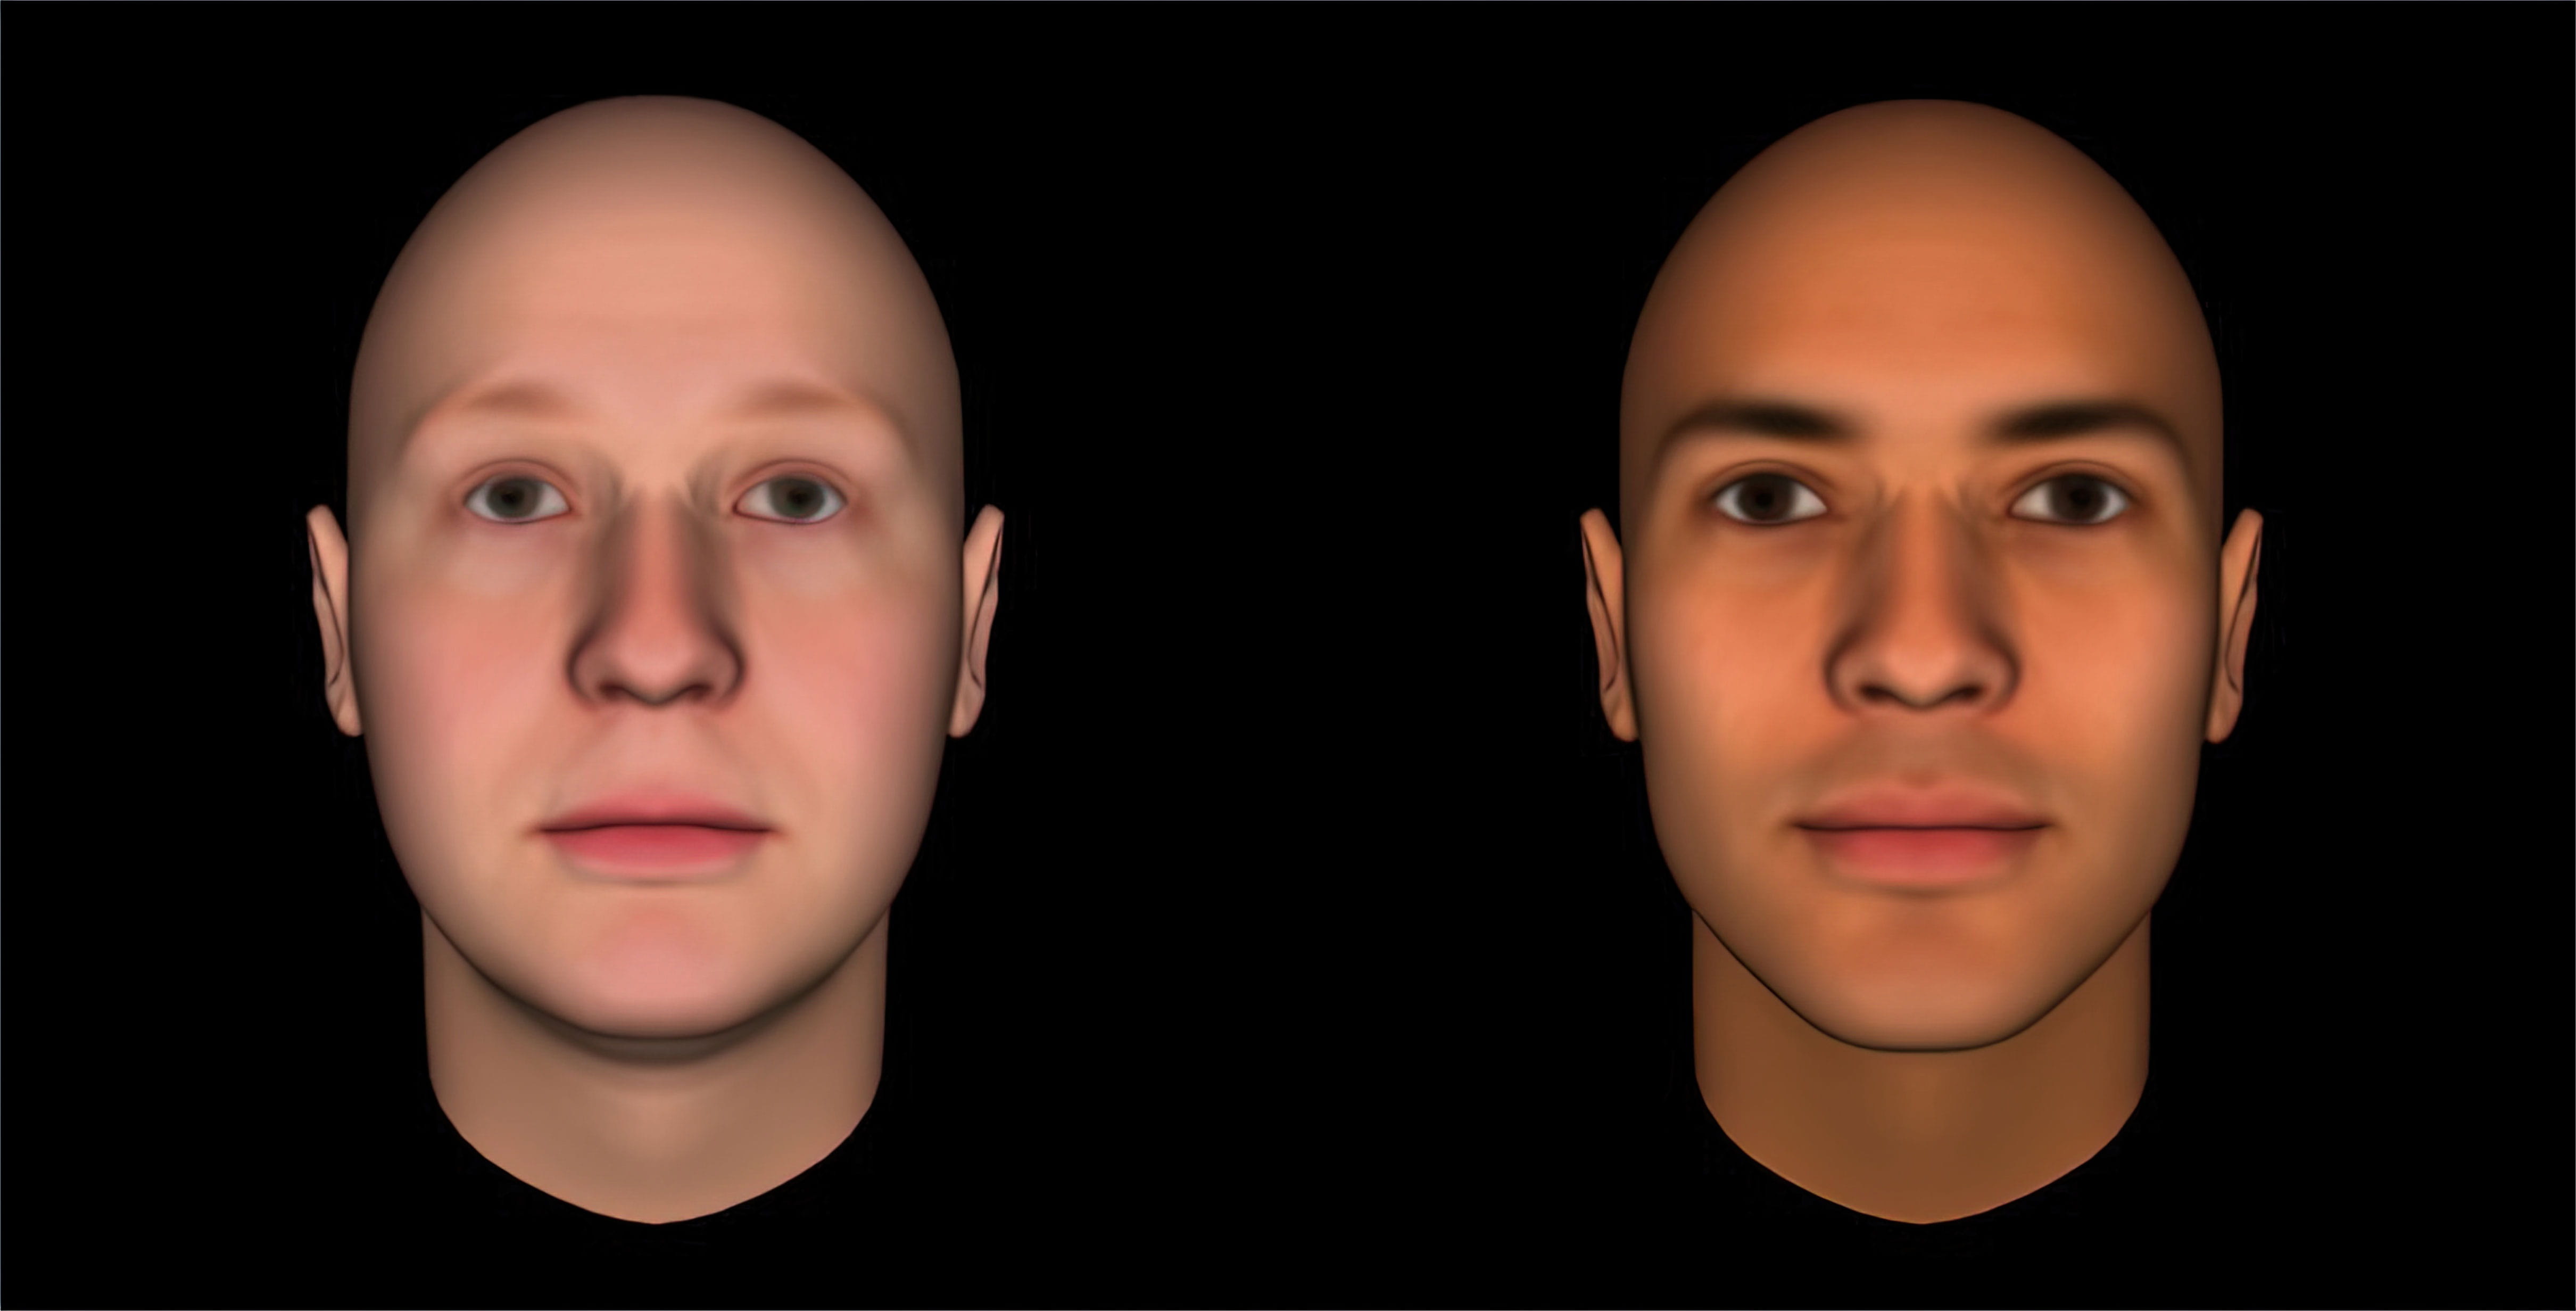 Computer-modeled faces